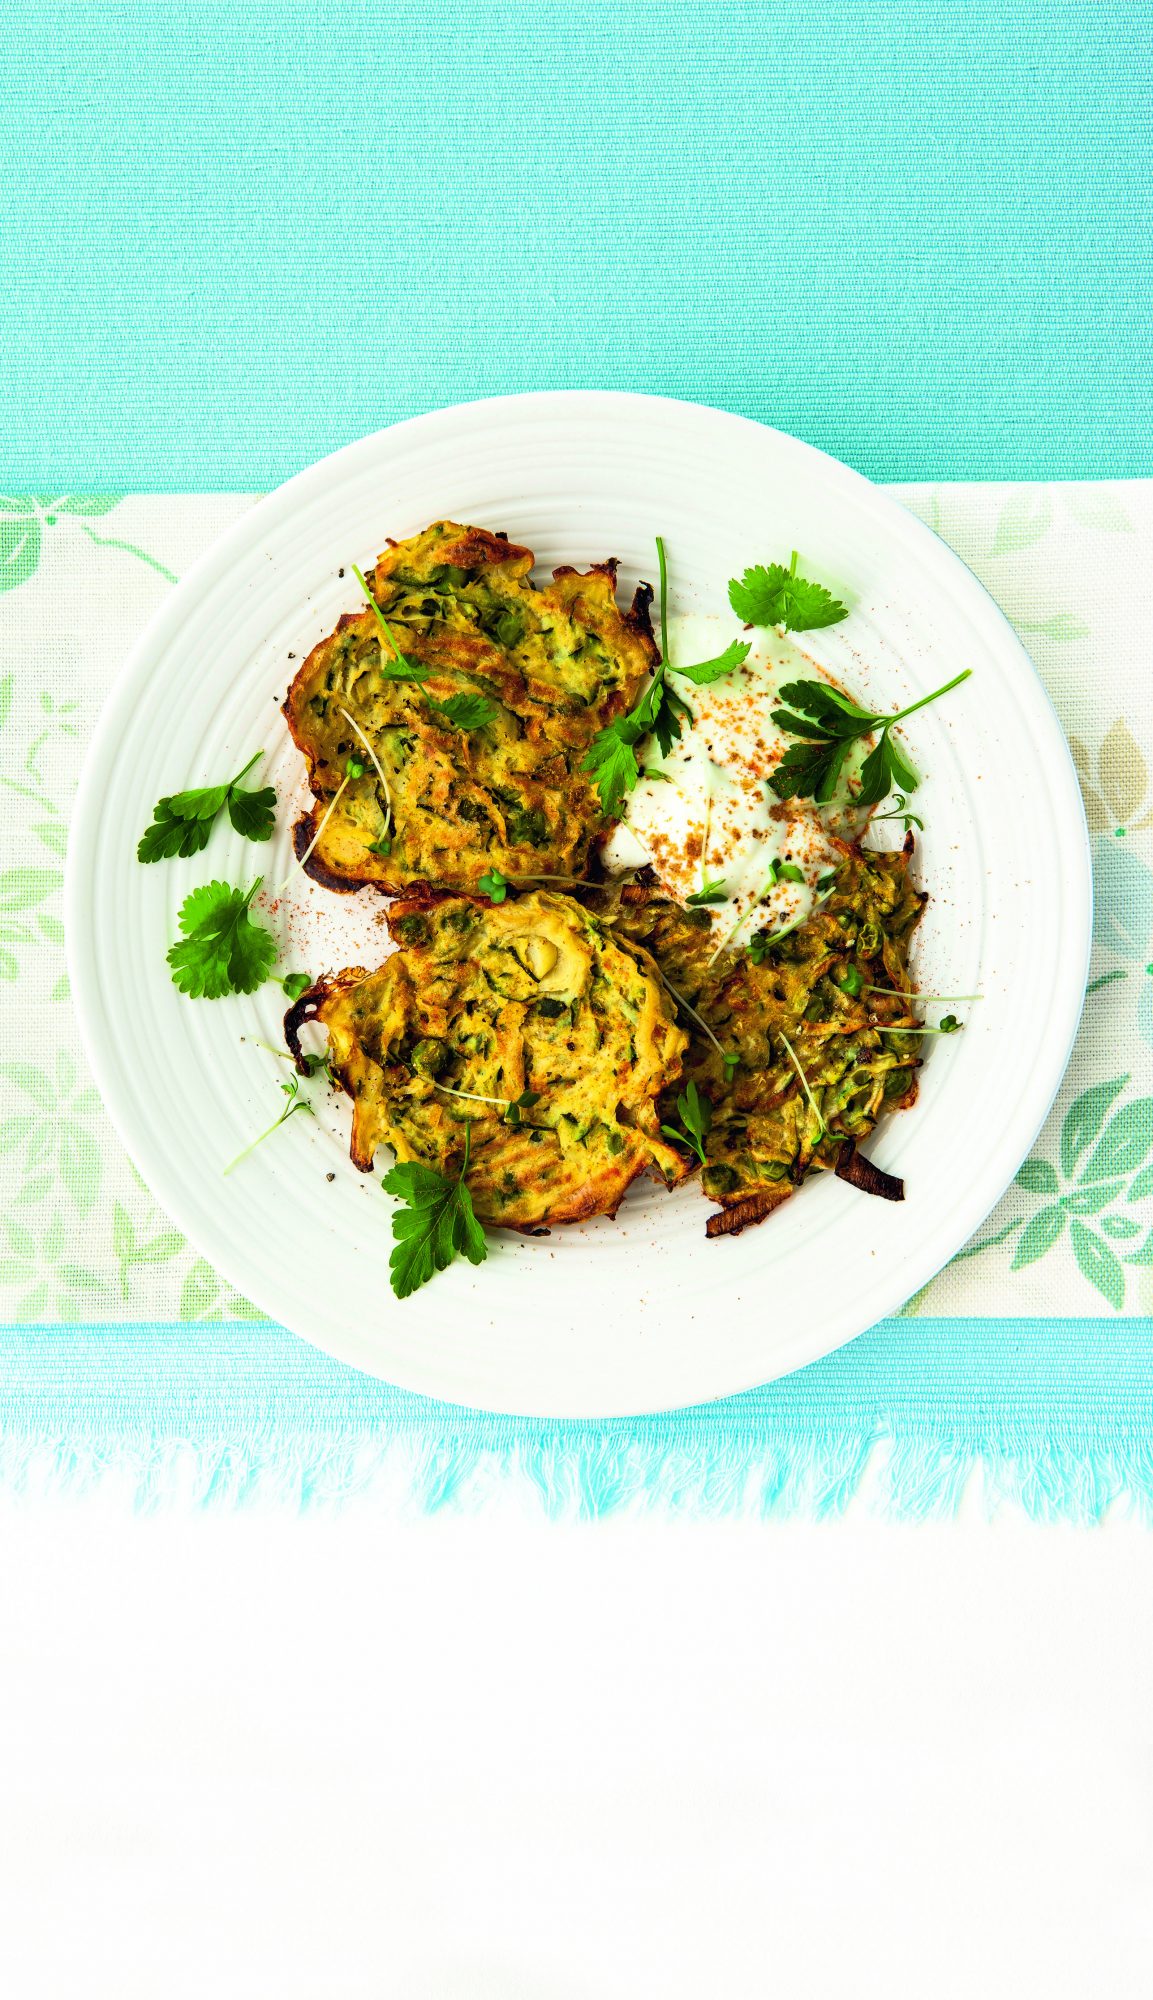 Spiced Zucchini, Leek and Pea Fritters